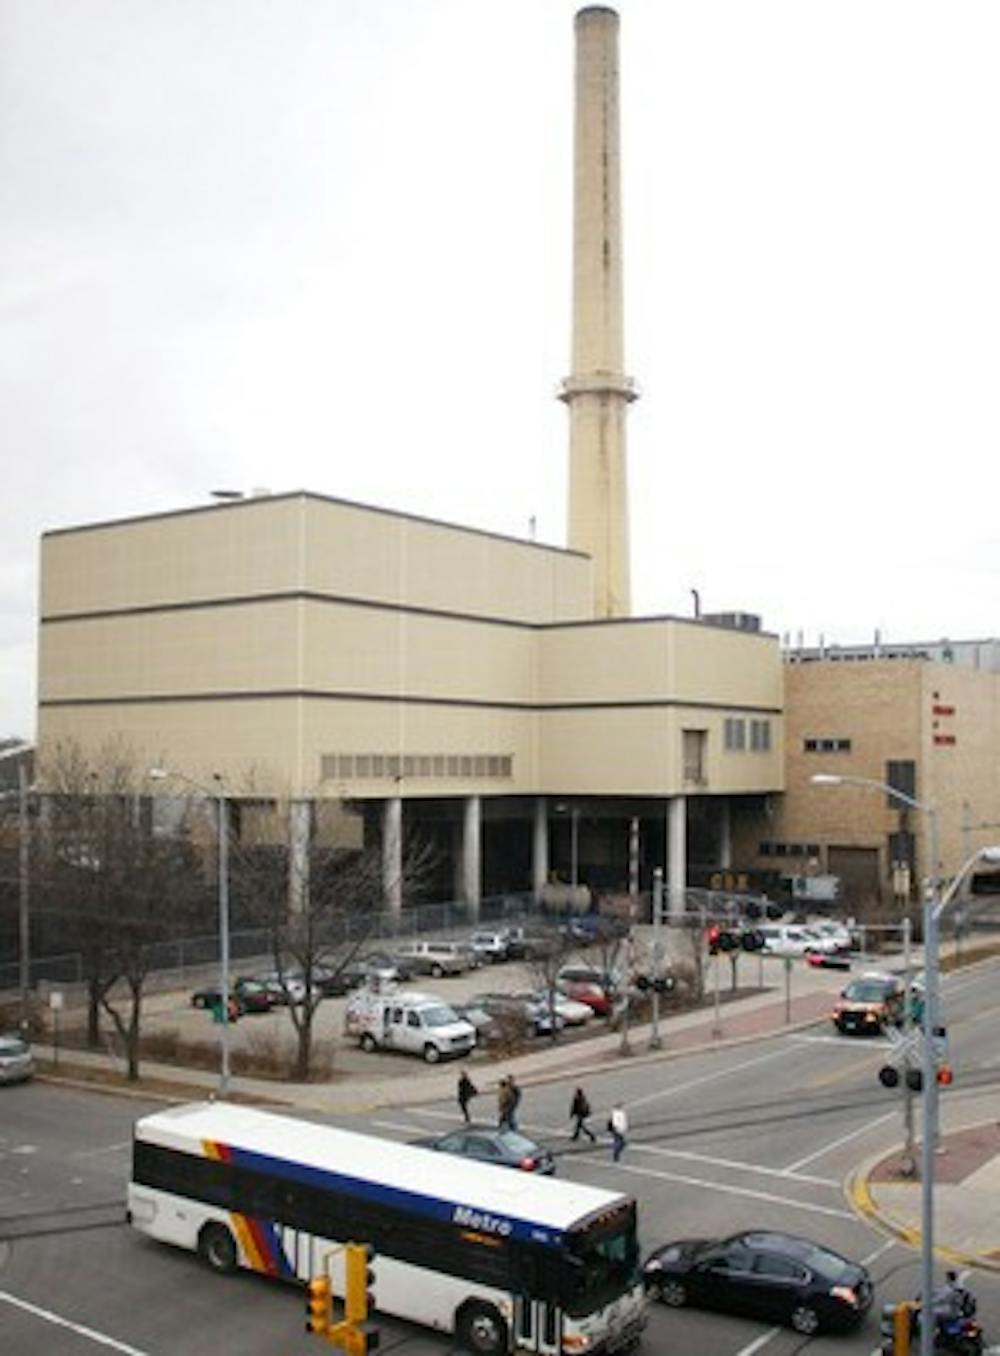 UW coal plant to reduce emissions by 15 percent